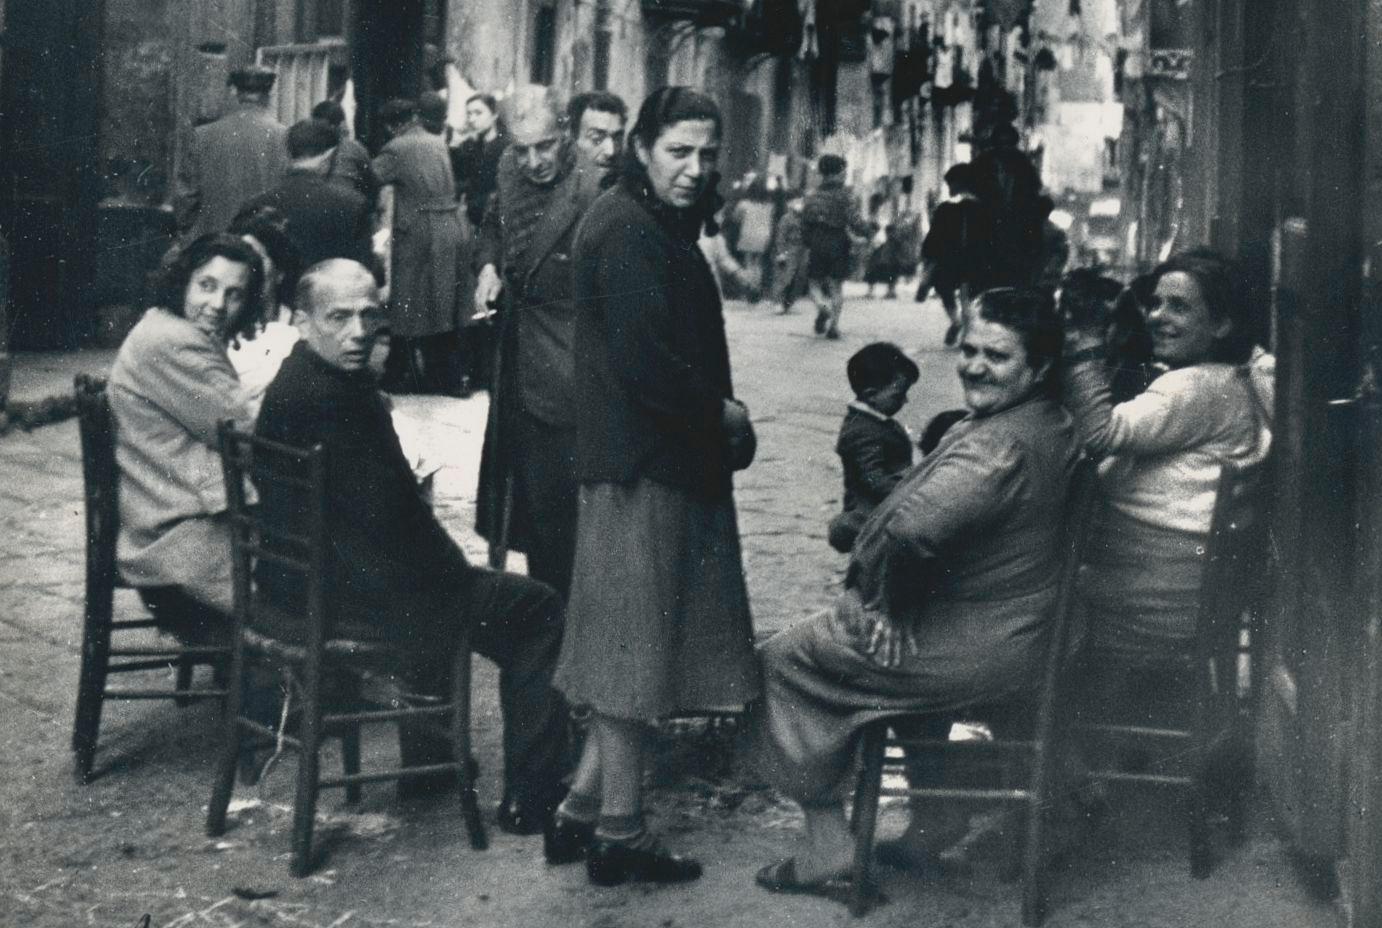 Naples - People sitting on the streets, Italy 1950s - Photograph by Erich Andres